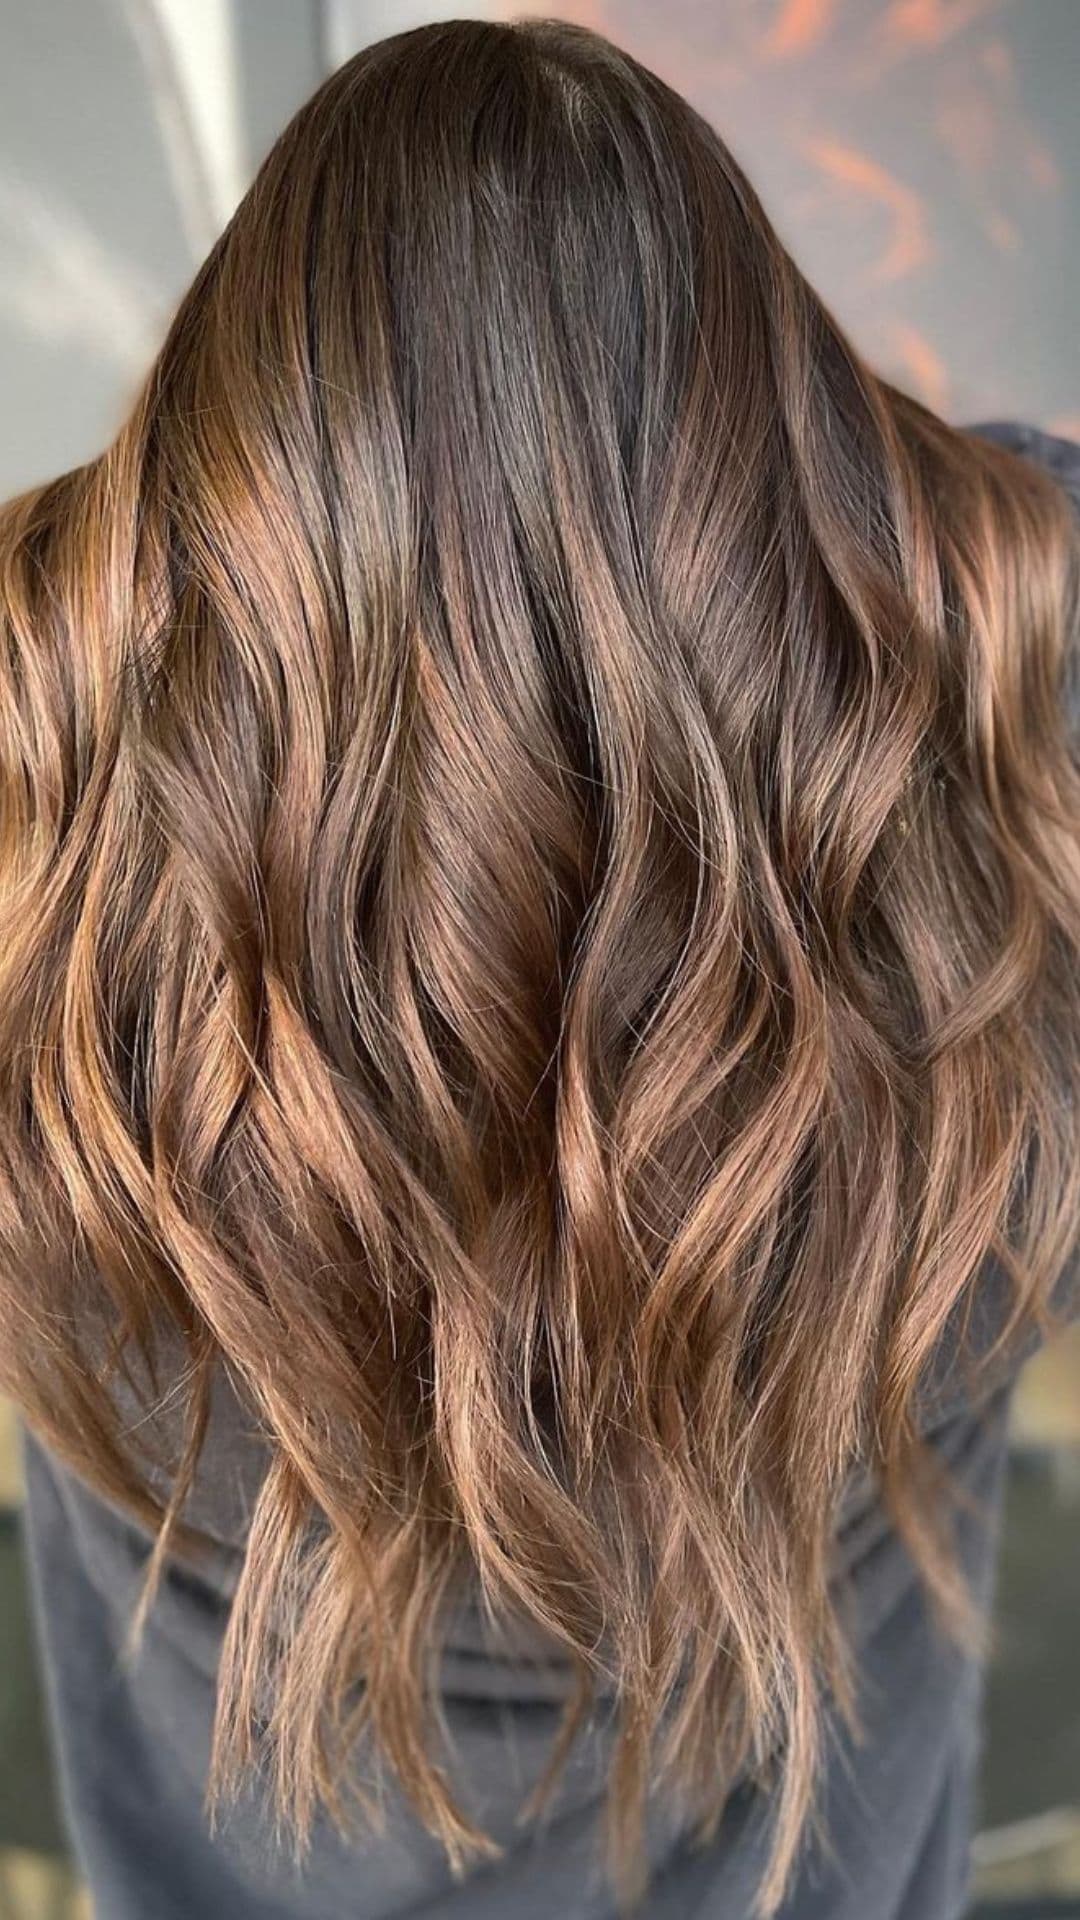 A woman modelling a brown ombre balayage highlights hair.